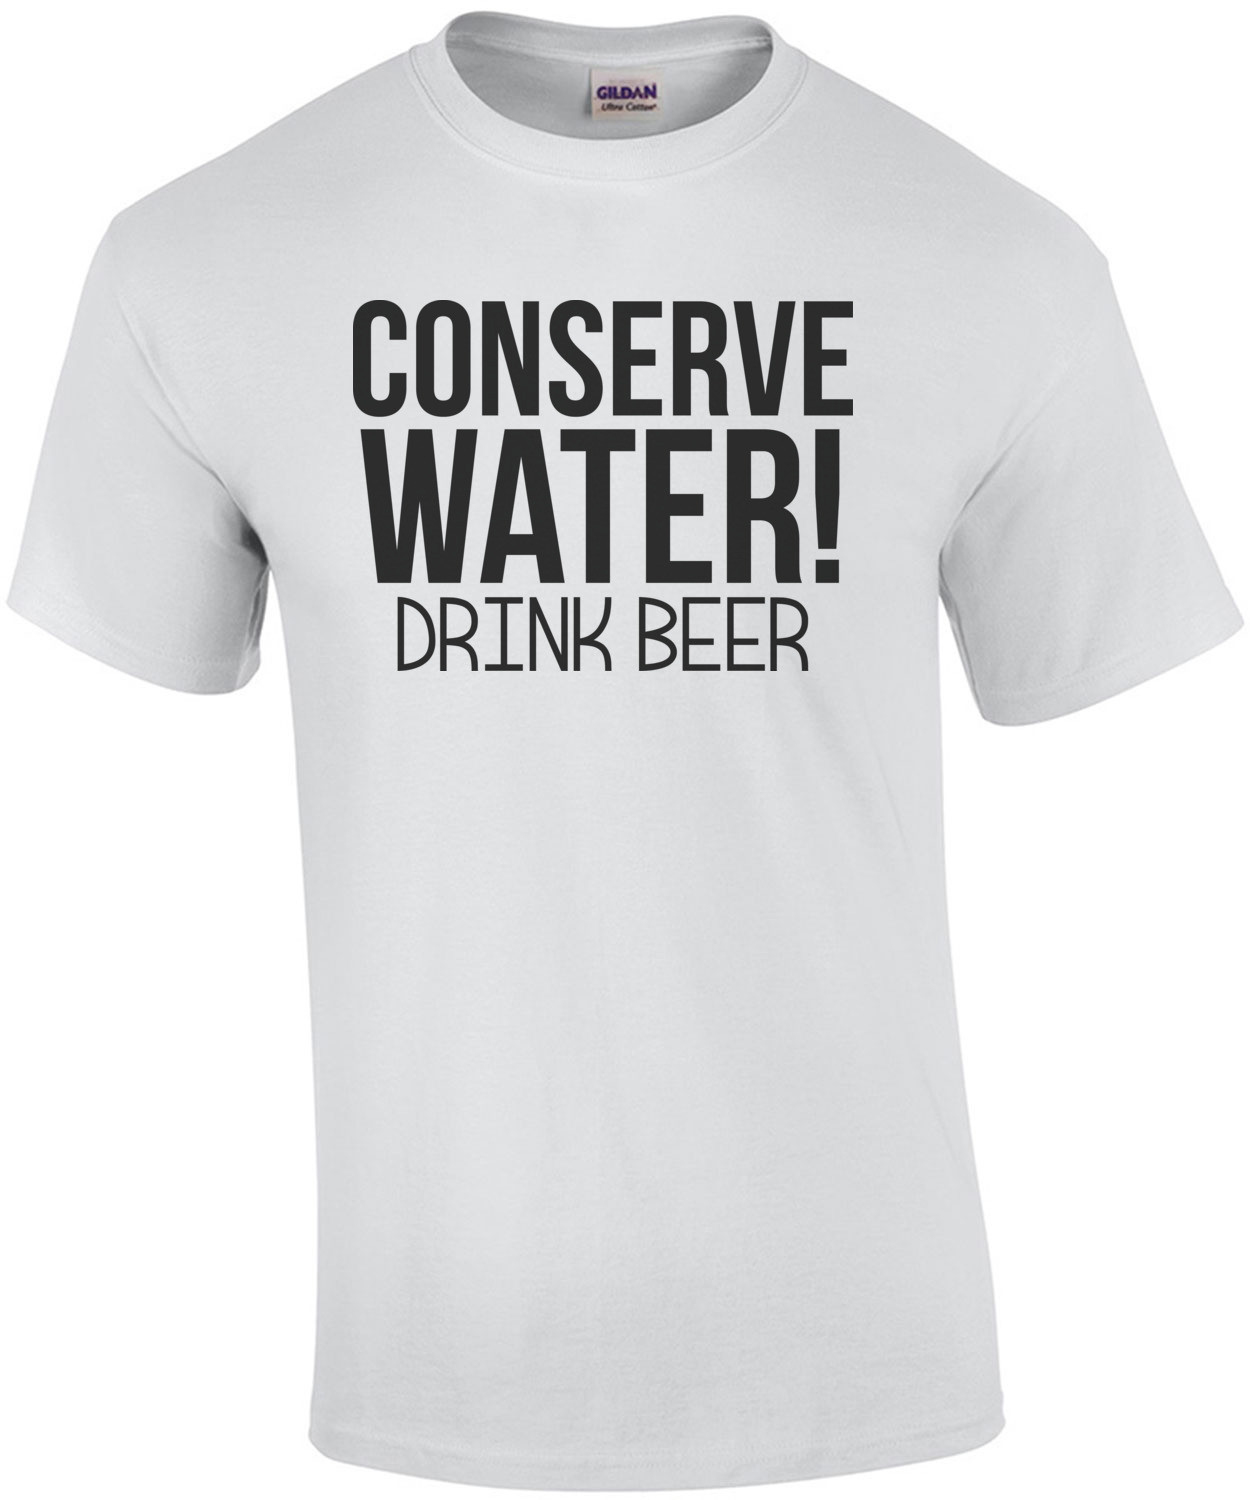 Conserve Water! Drink Beer Shirt